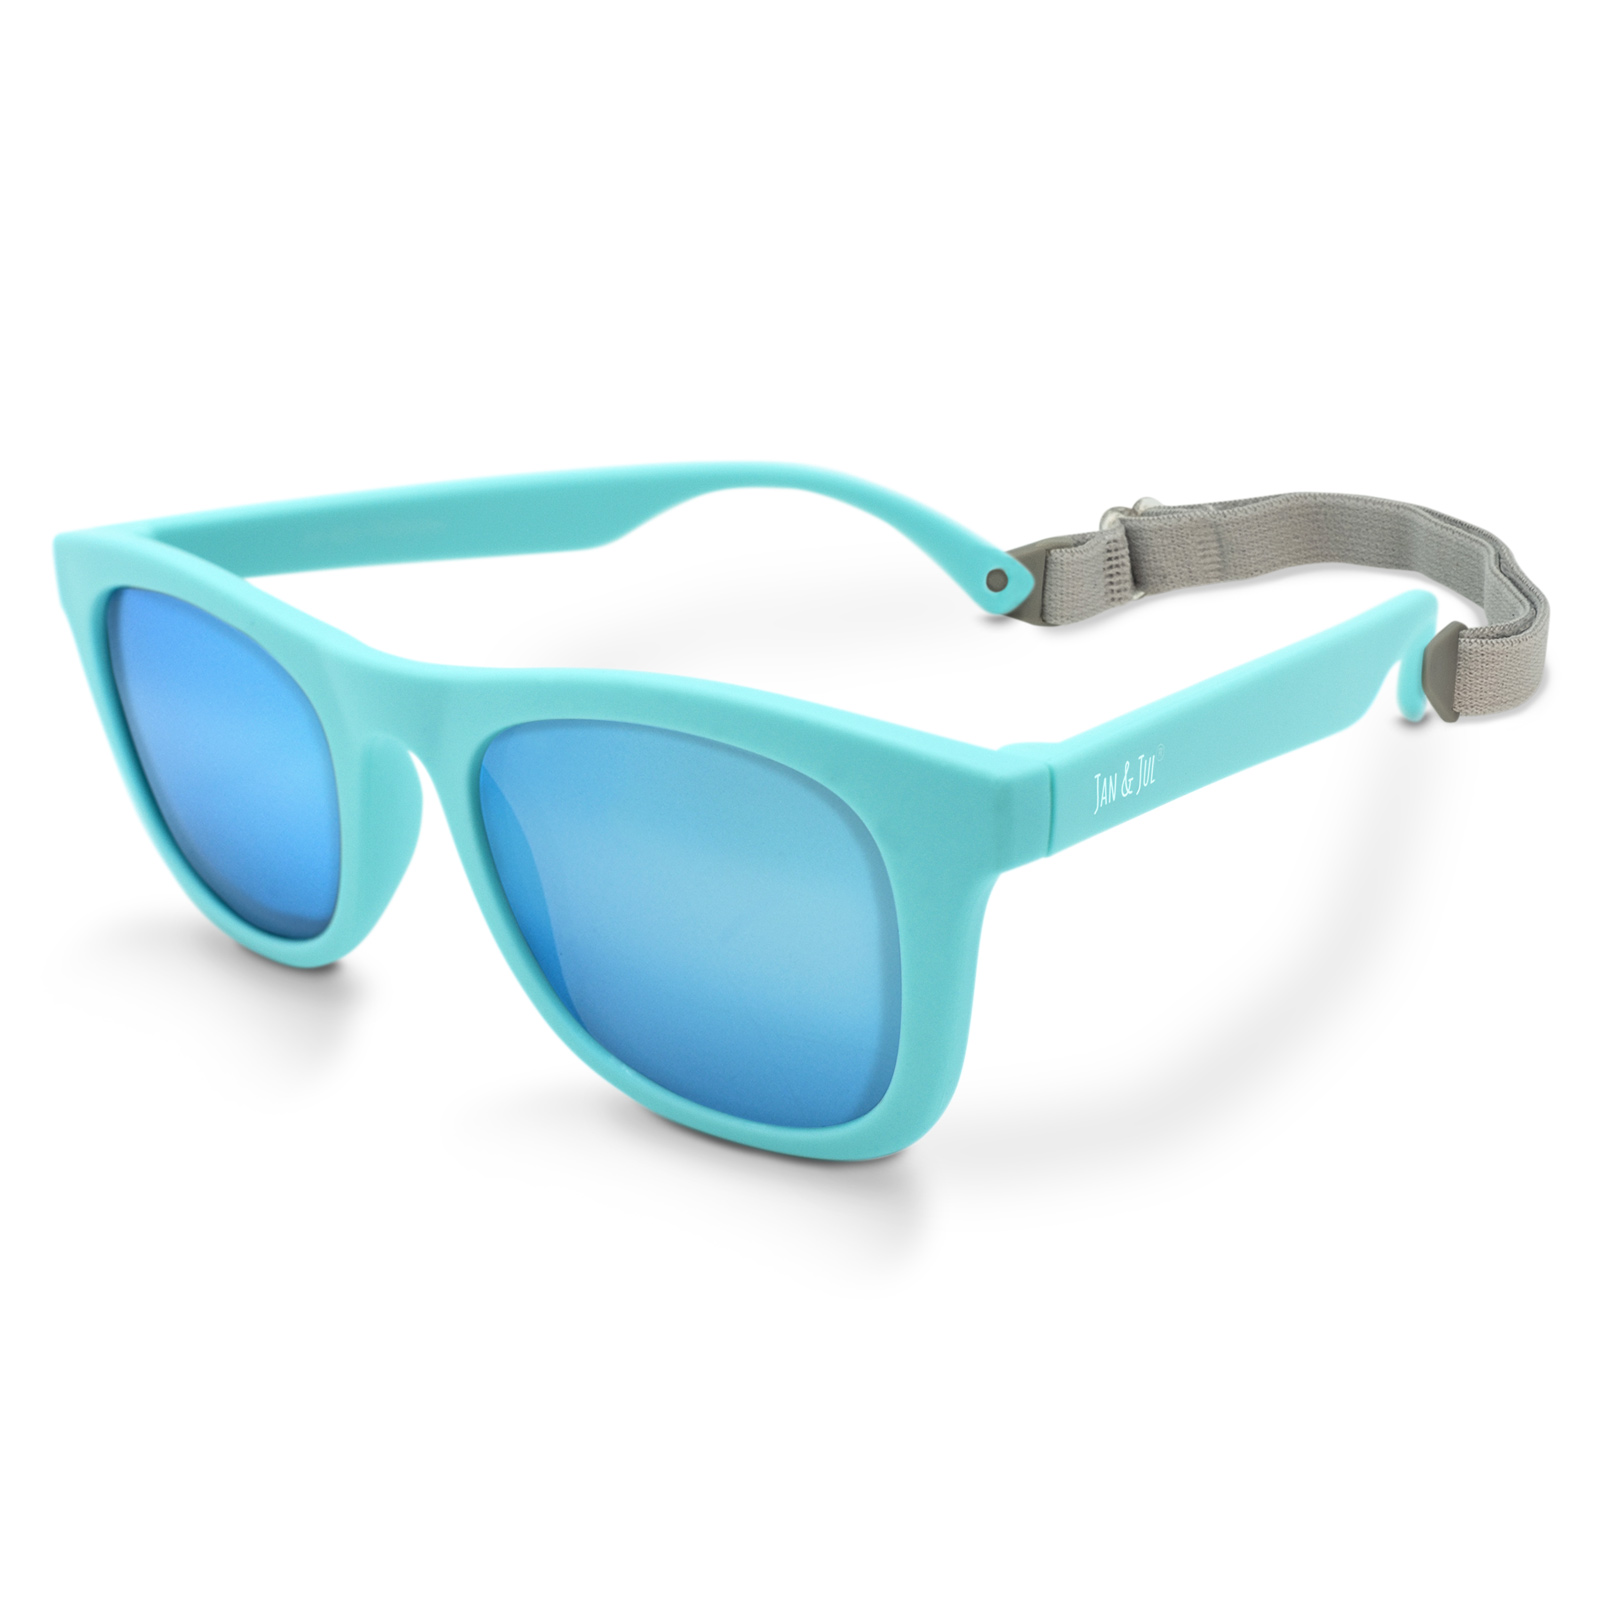 Jan & Jul Sunglasses for Baby Boy Girl UV400 with Adjustable Strap (S: 6 Months -2 Years, Mint Green Aurora) - image 1 of 7